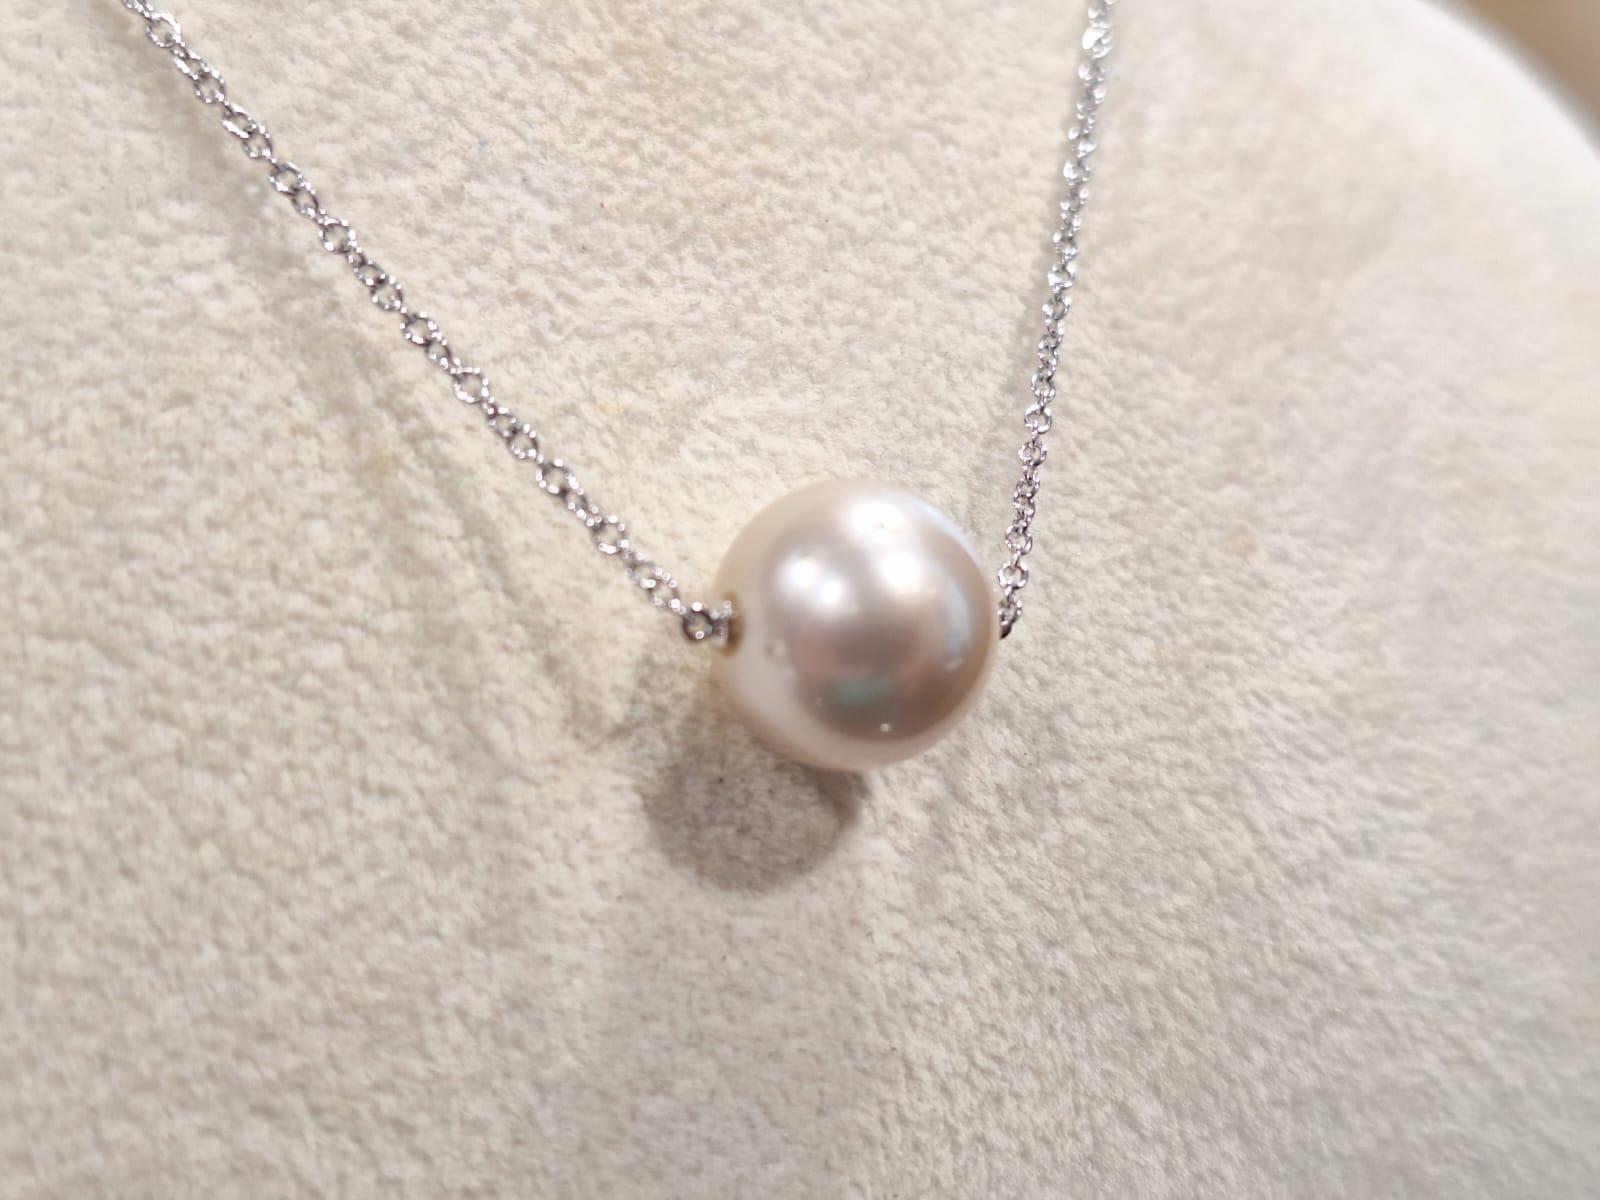 what does a white pearl symbolize